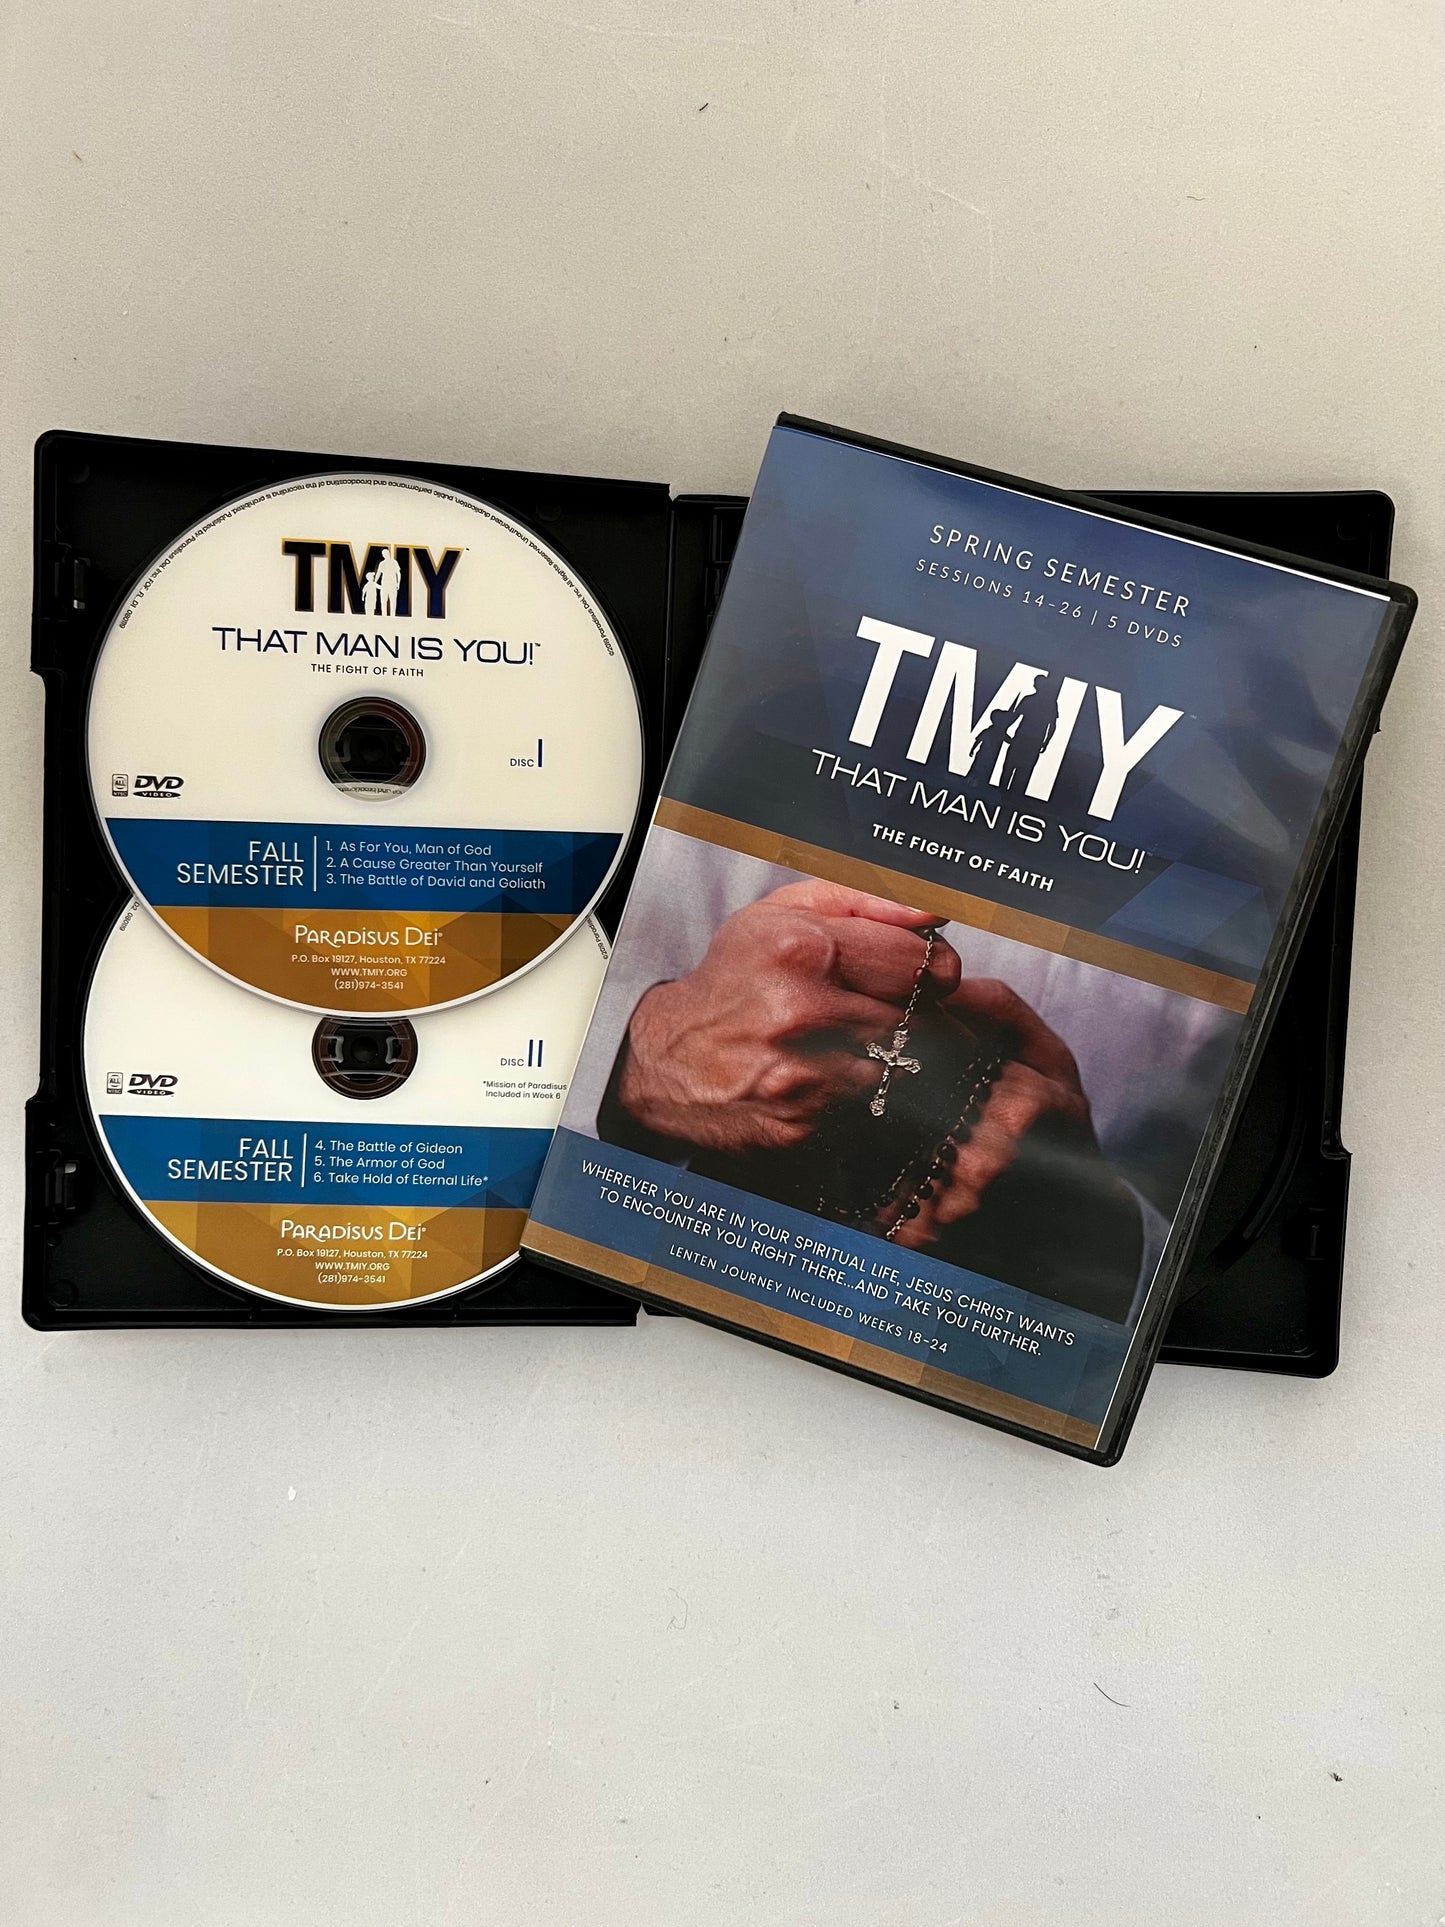 The Fight of Faith DVD Set (Fall and Spring)